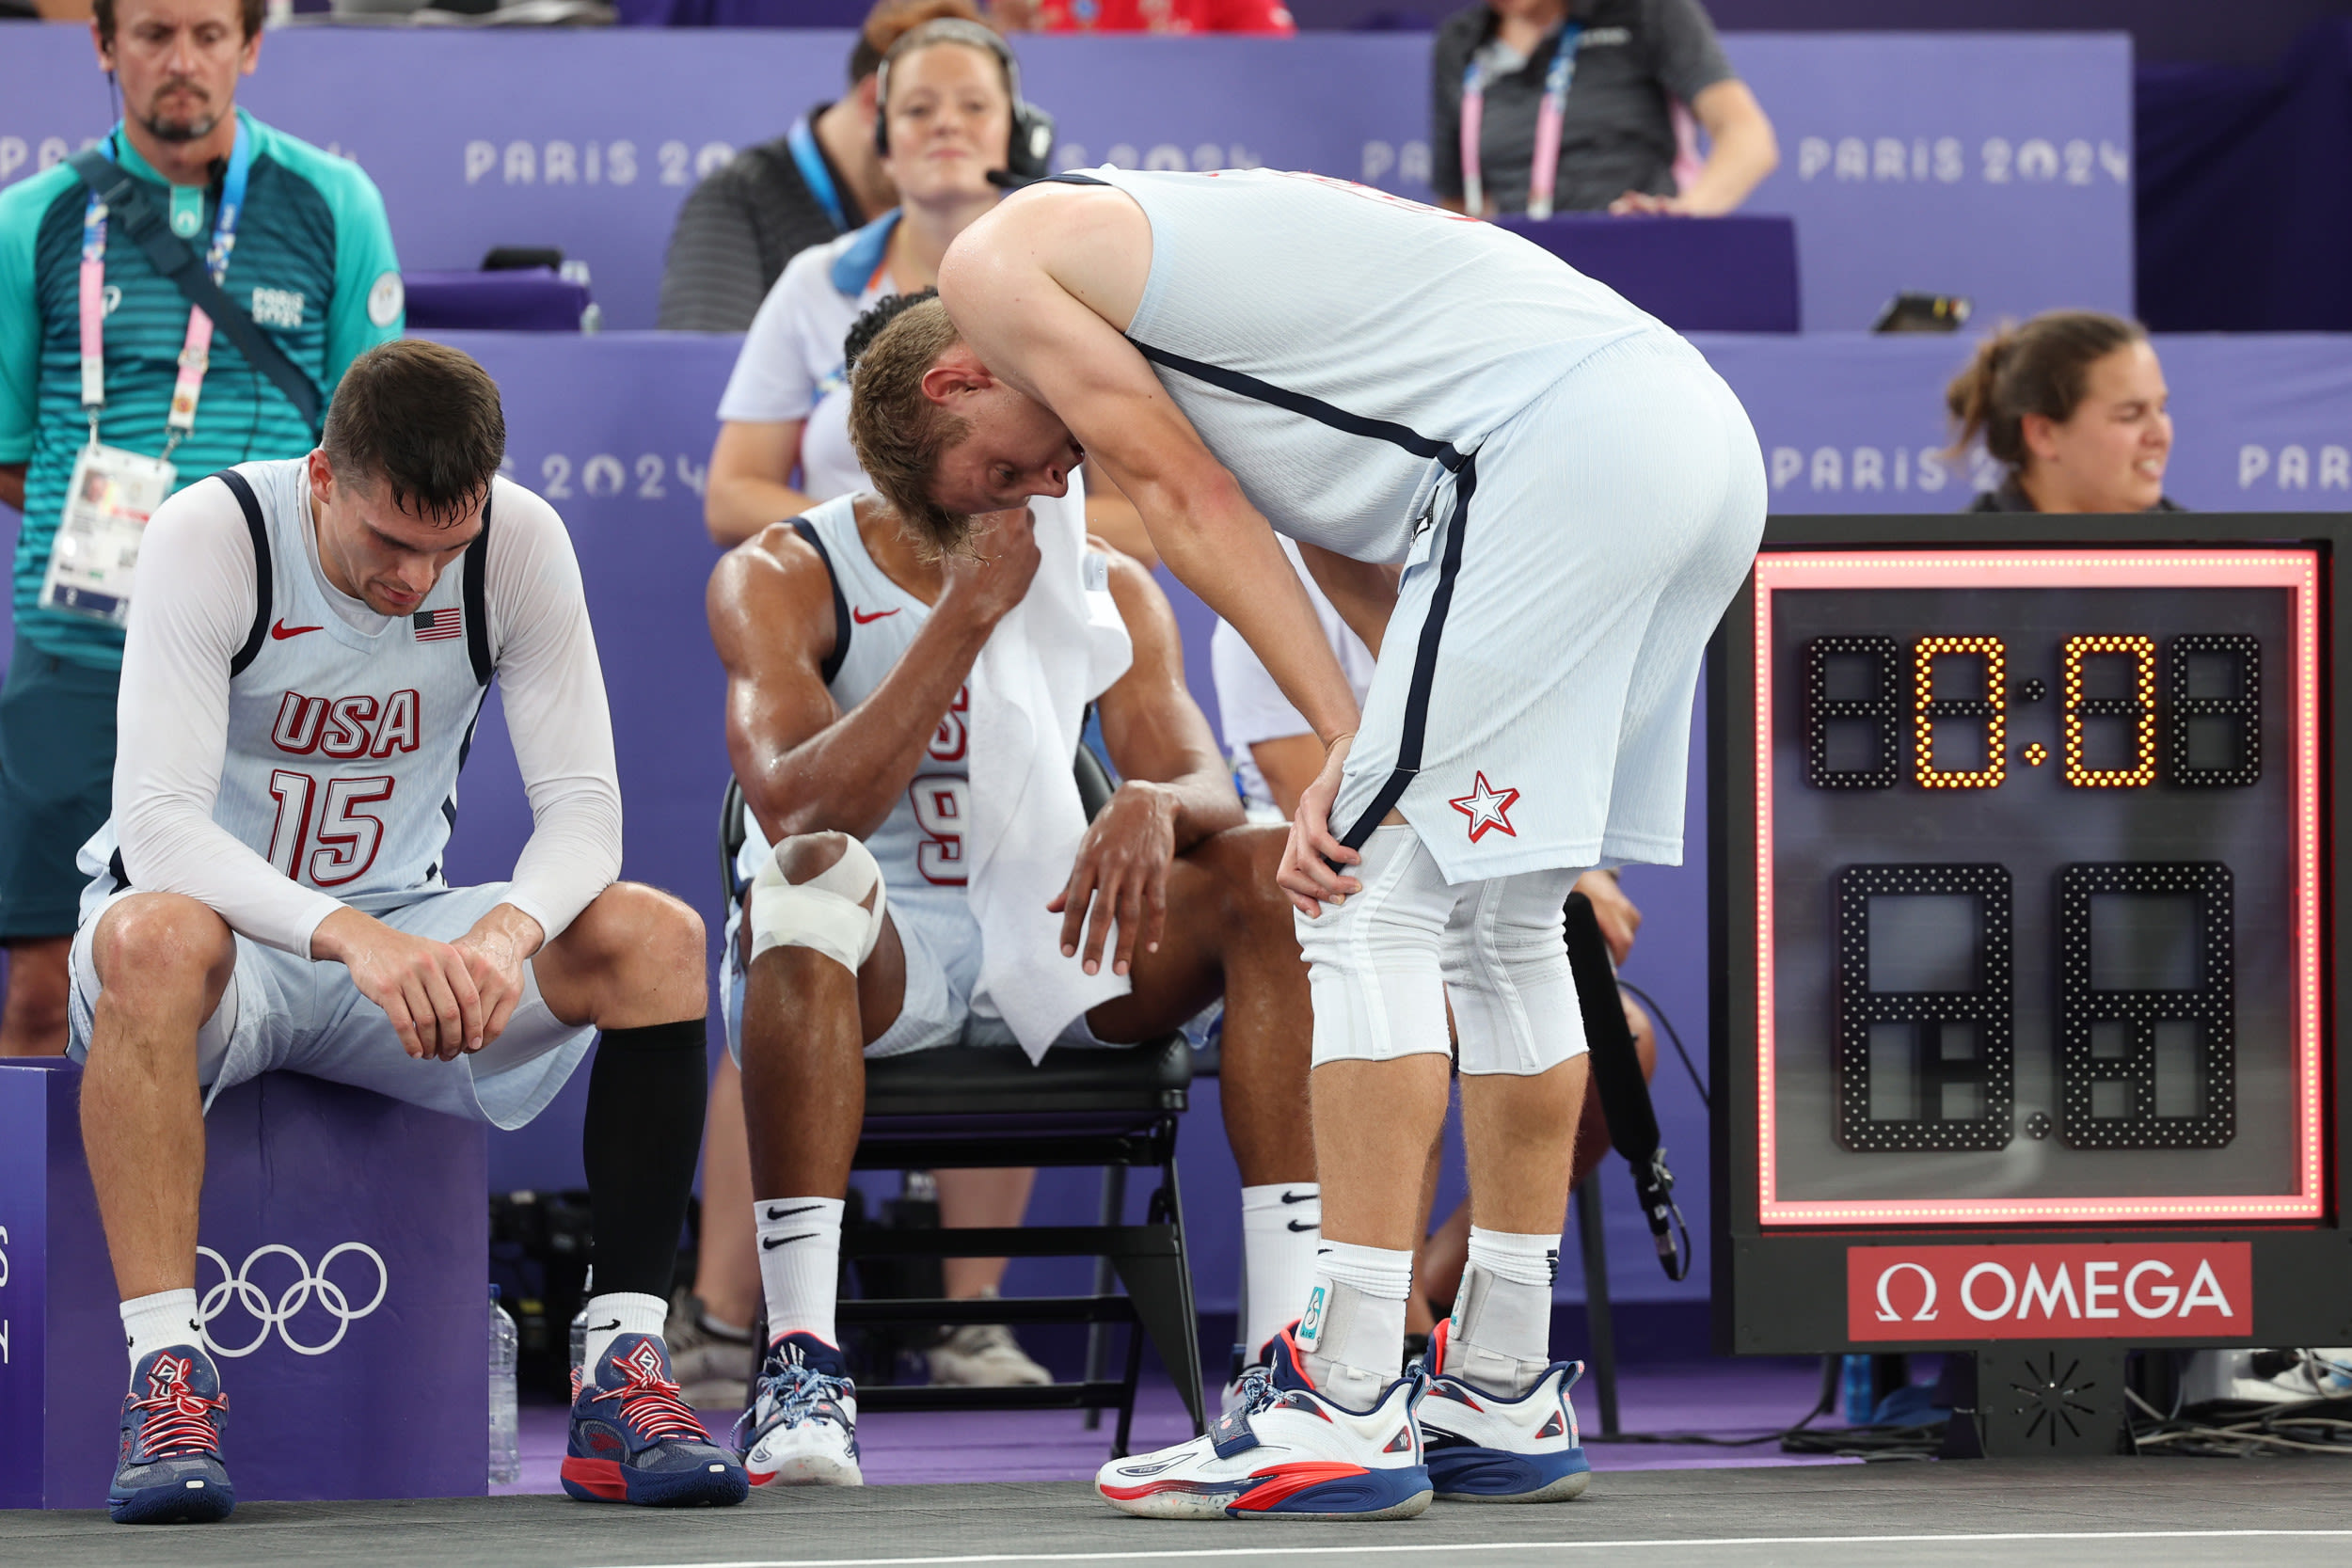 Olympic Basketball: 3x3 USA Men's Team Knocked Out of Competition by Nether